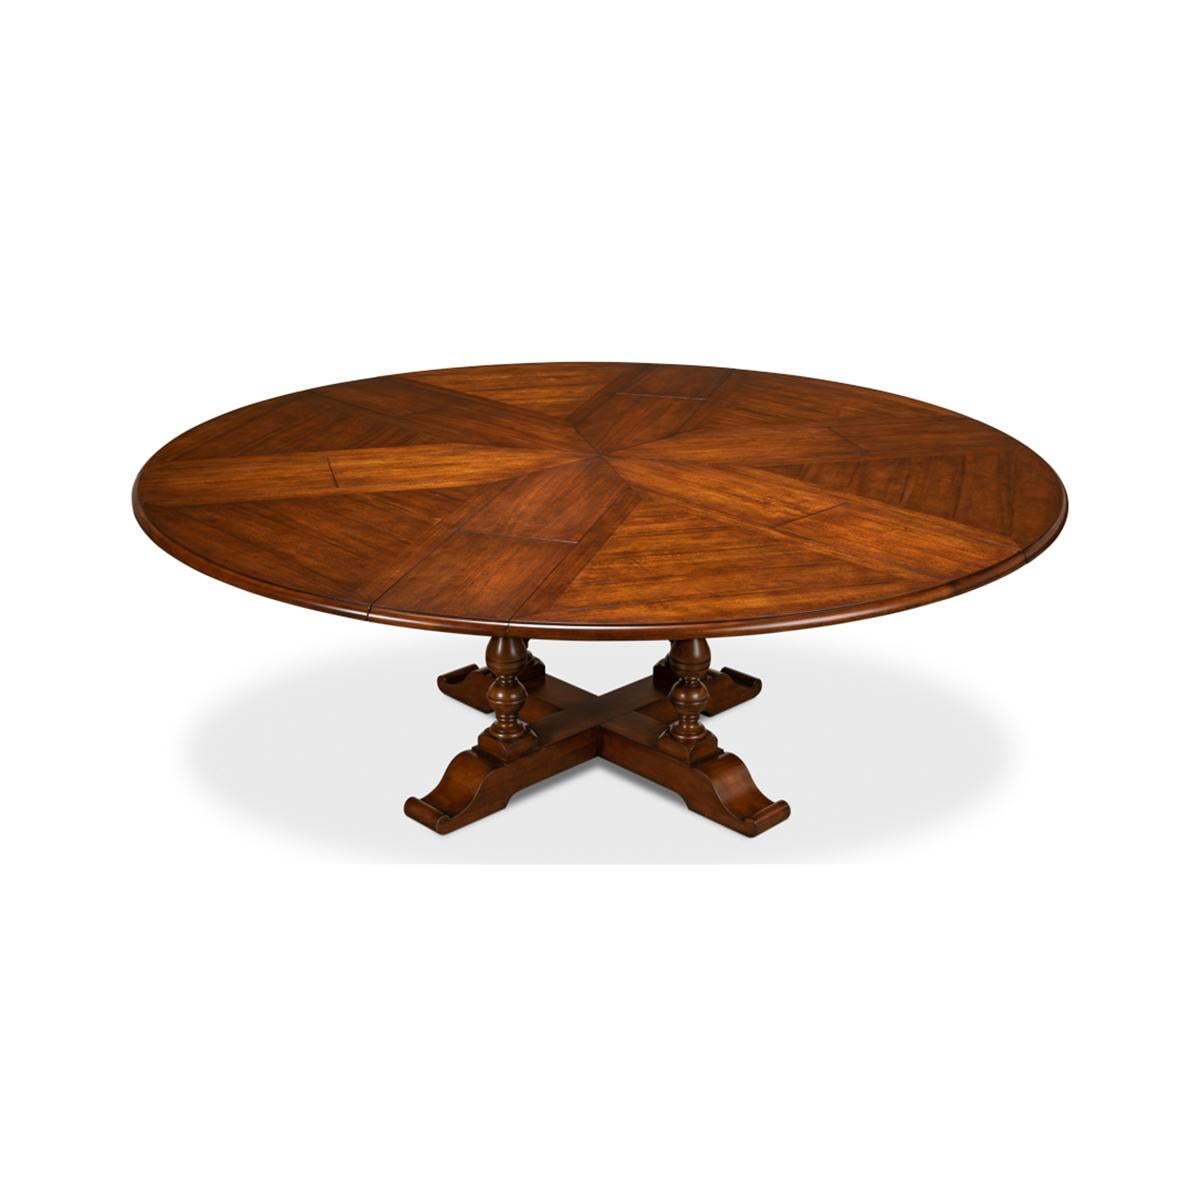 Vietnamese Early English Style Round Extension Dining Table - 84